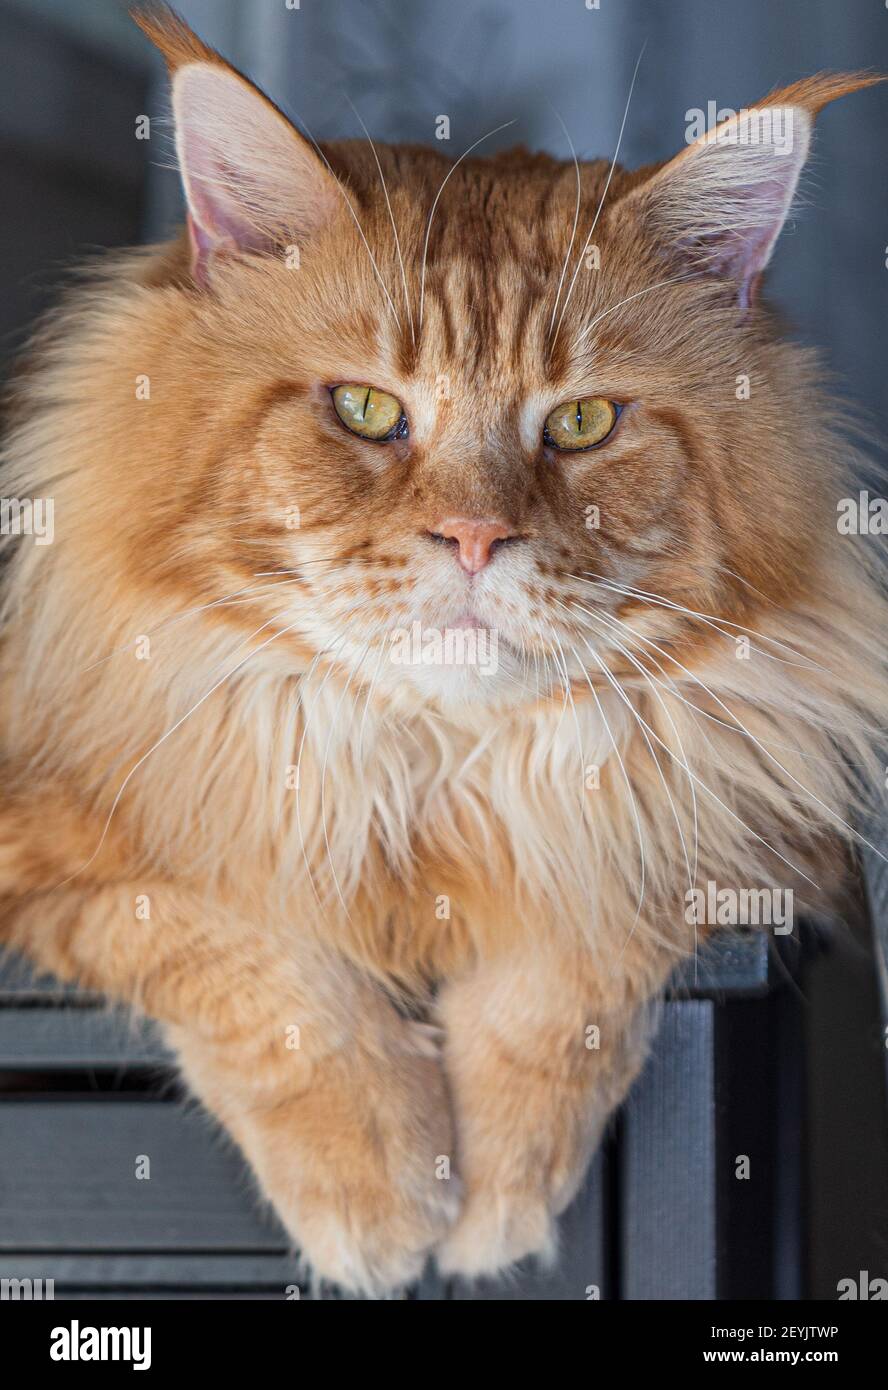 Purebred red Maine Coon cat at home, pet image Stock Photo